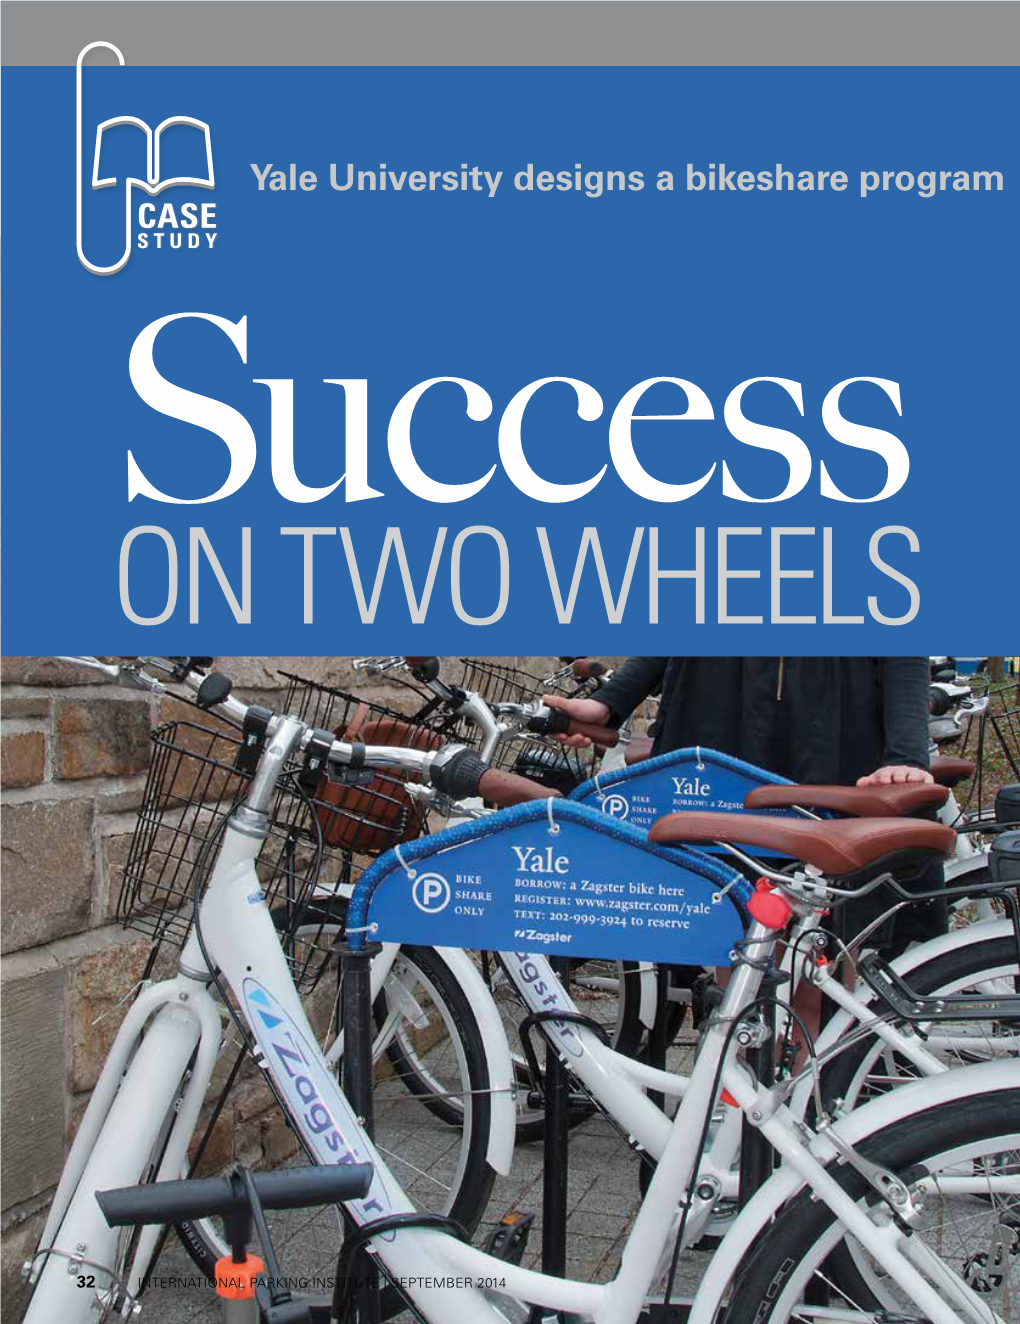 Yale University Designs a Bikeshare Program That Works for Students, Faculty, and the Campus